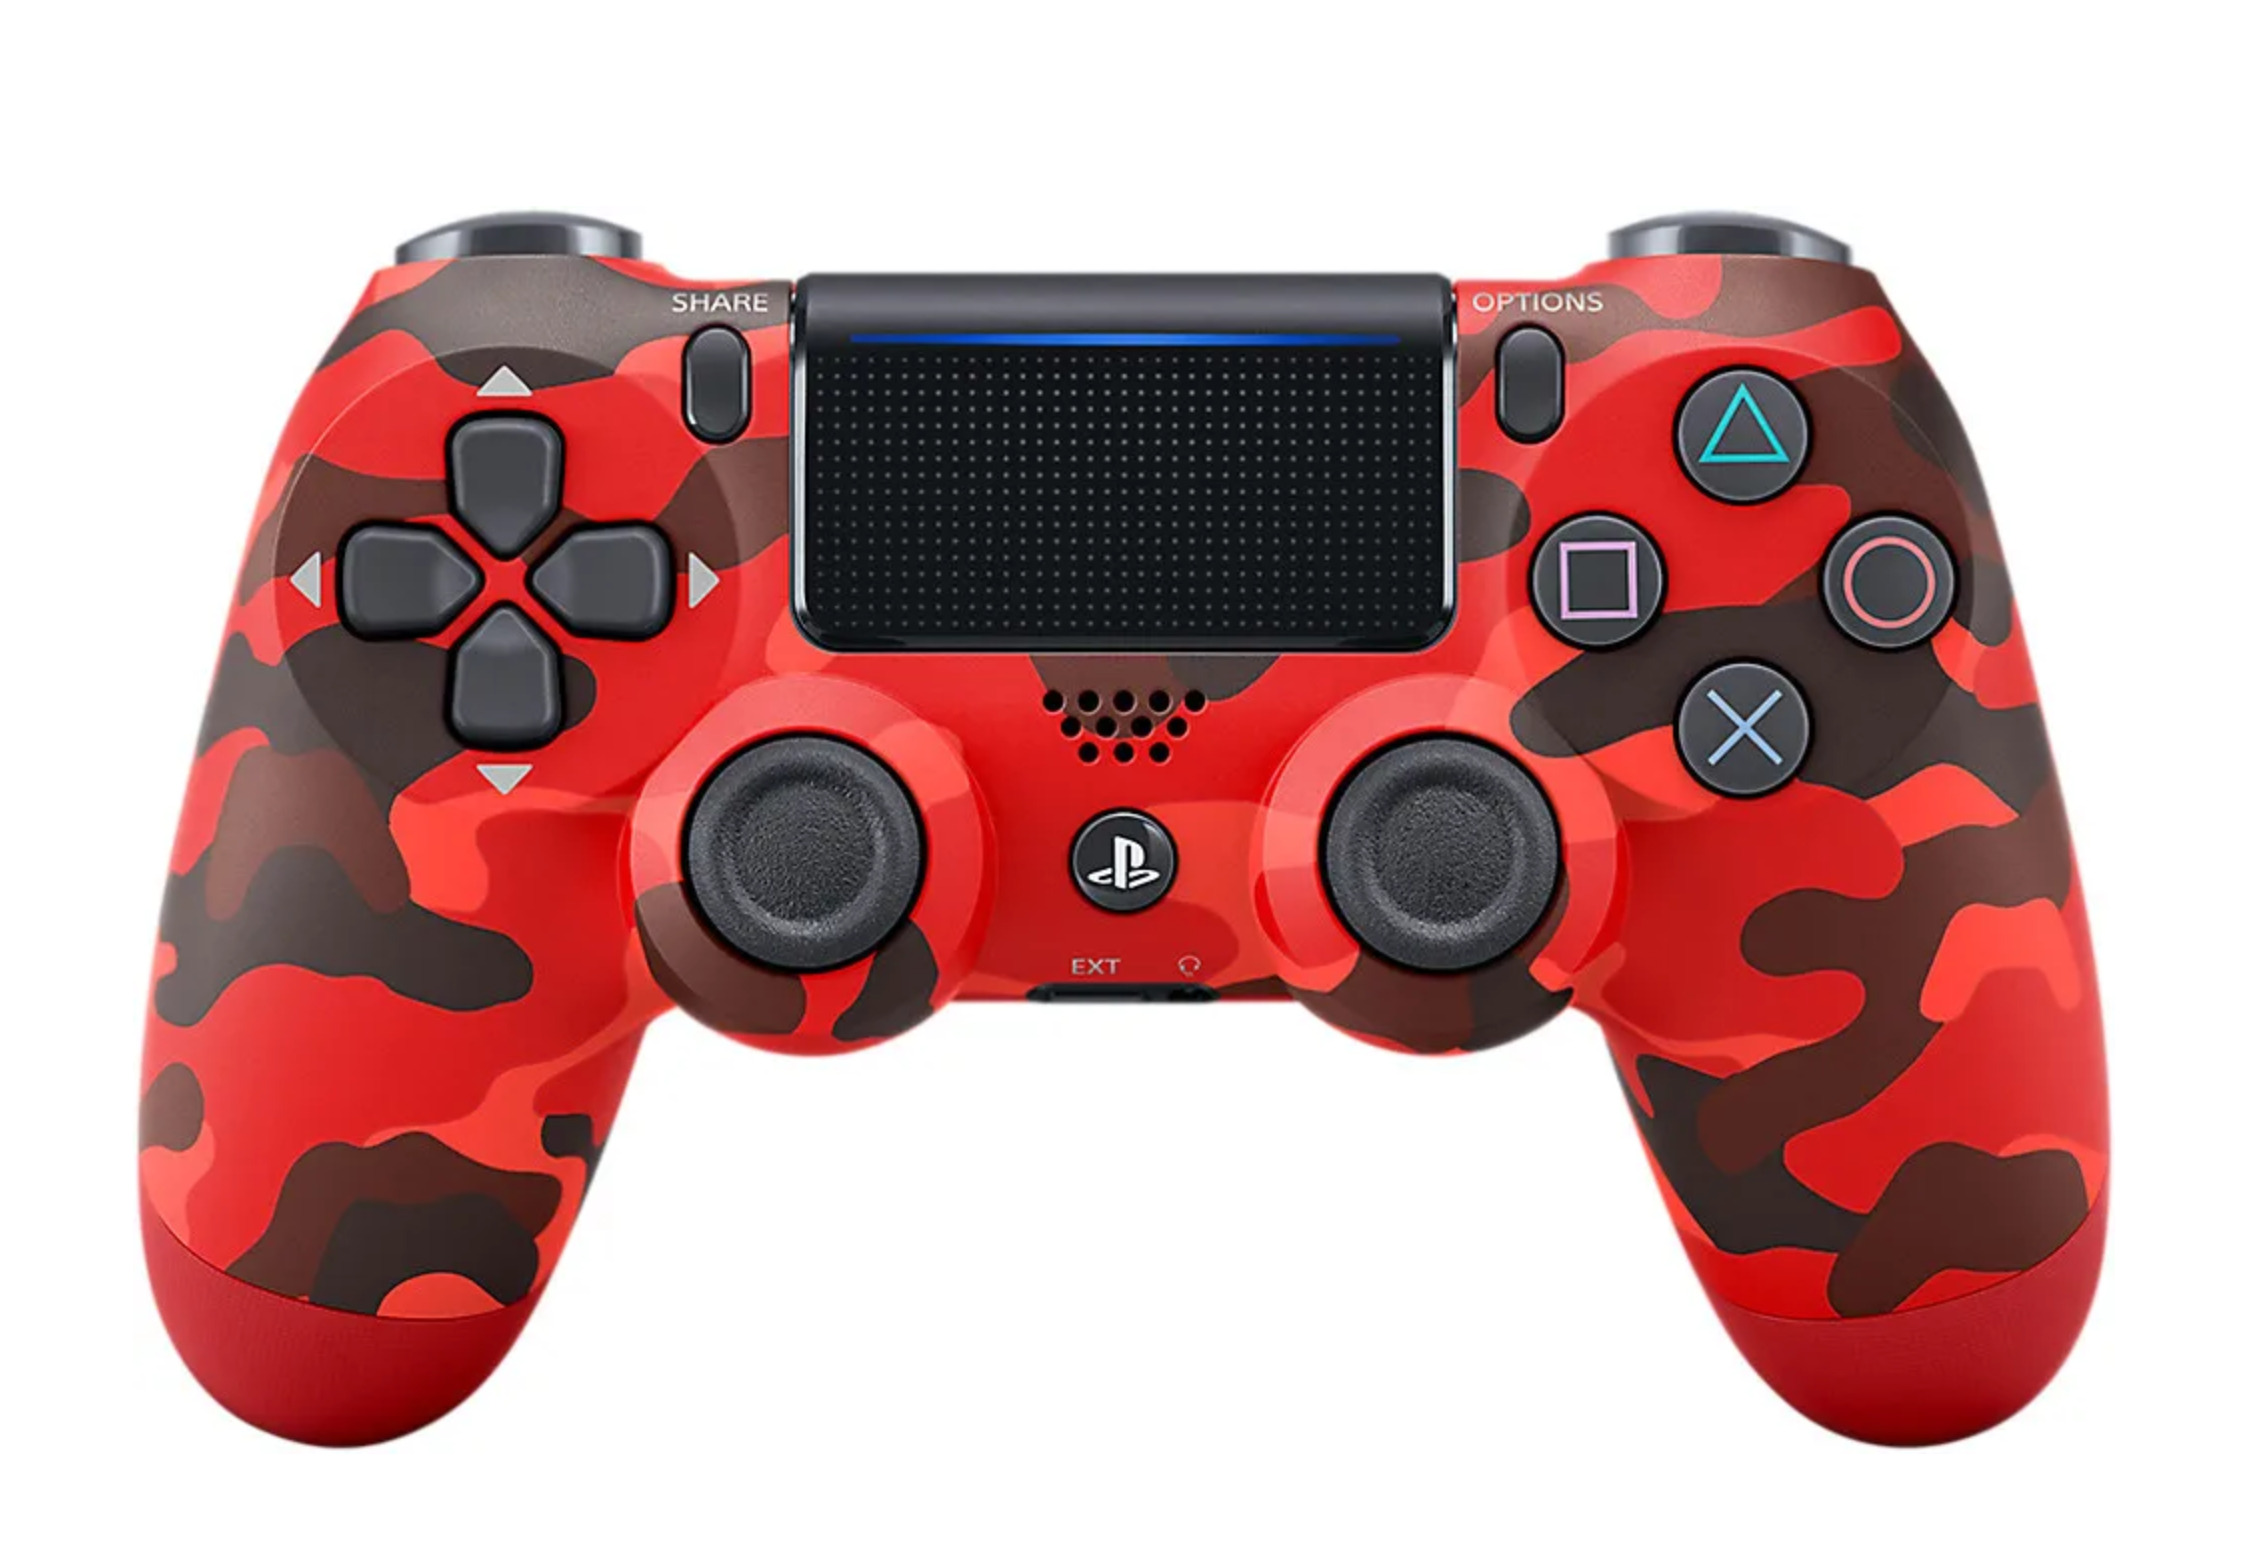 Wireless controller ps4. Sony PLAYSTATION 4 Dualshock 4. Джойстик Dualshock 4. Джойстик Sony ps4. CUH-zct2e.